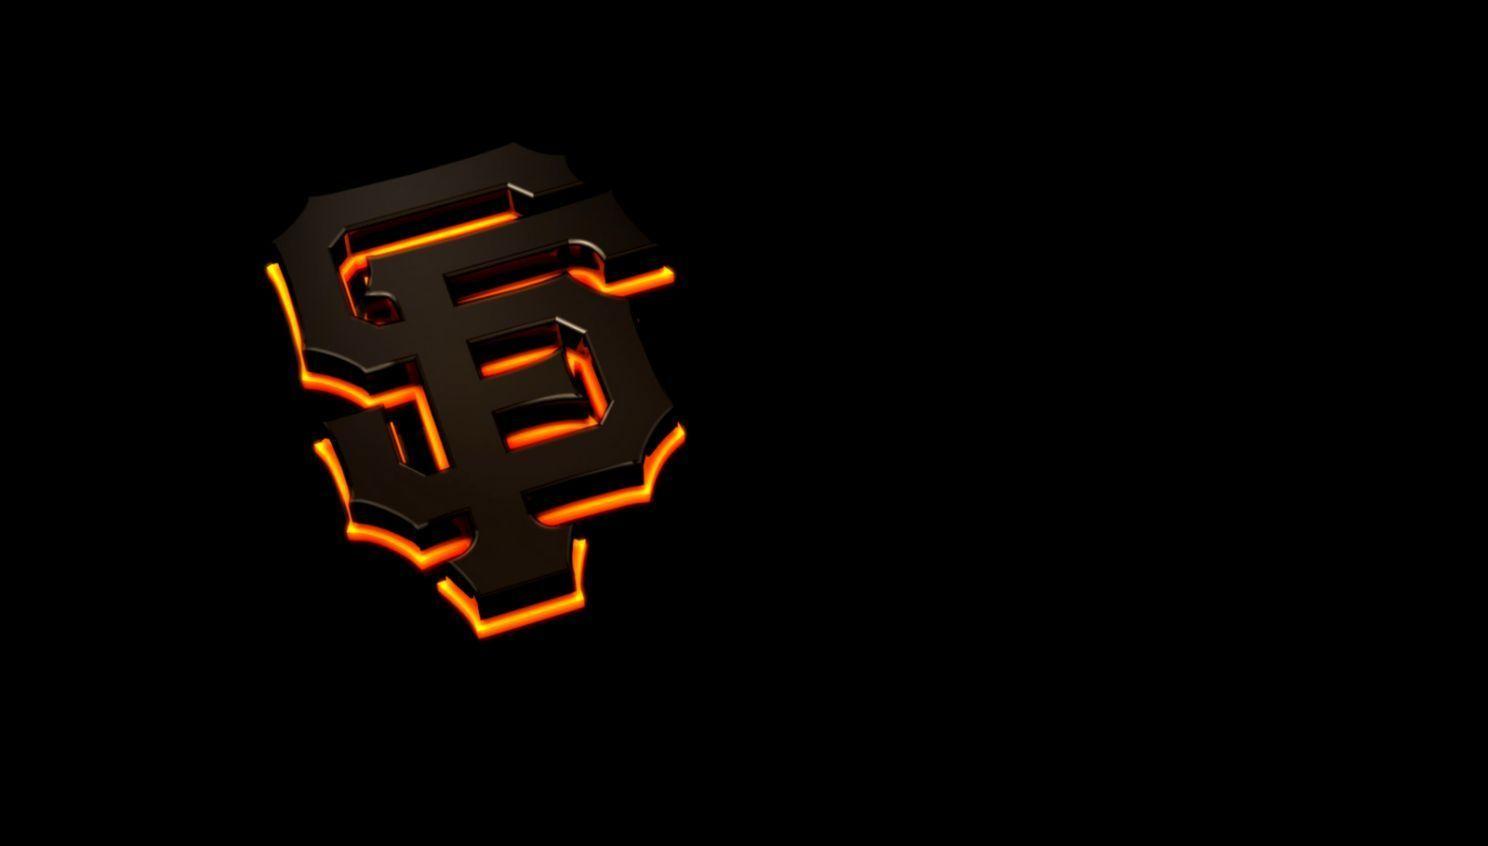 Amazing San Francisco Giants Wallpaper. Full HD Picture